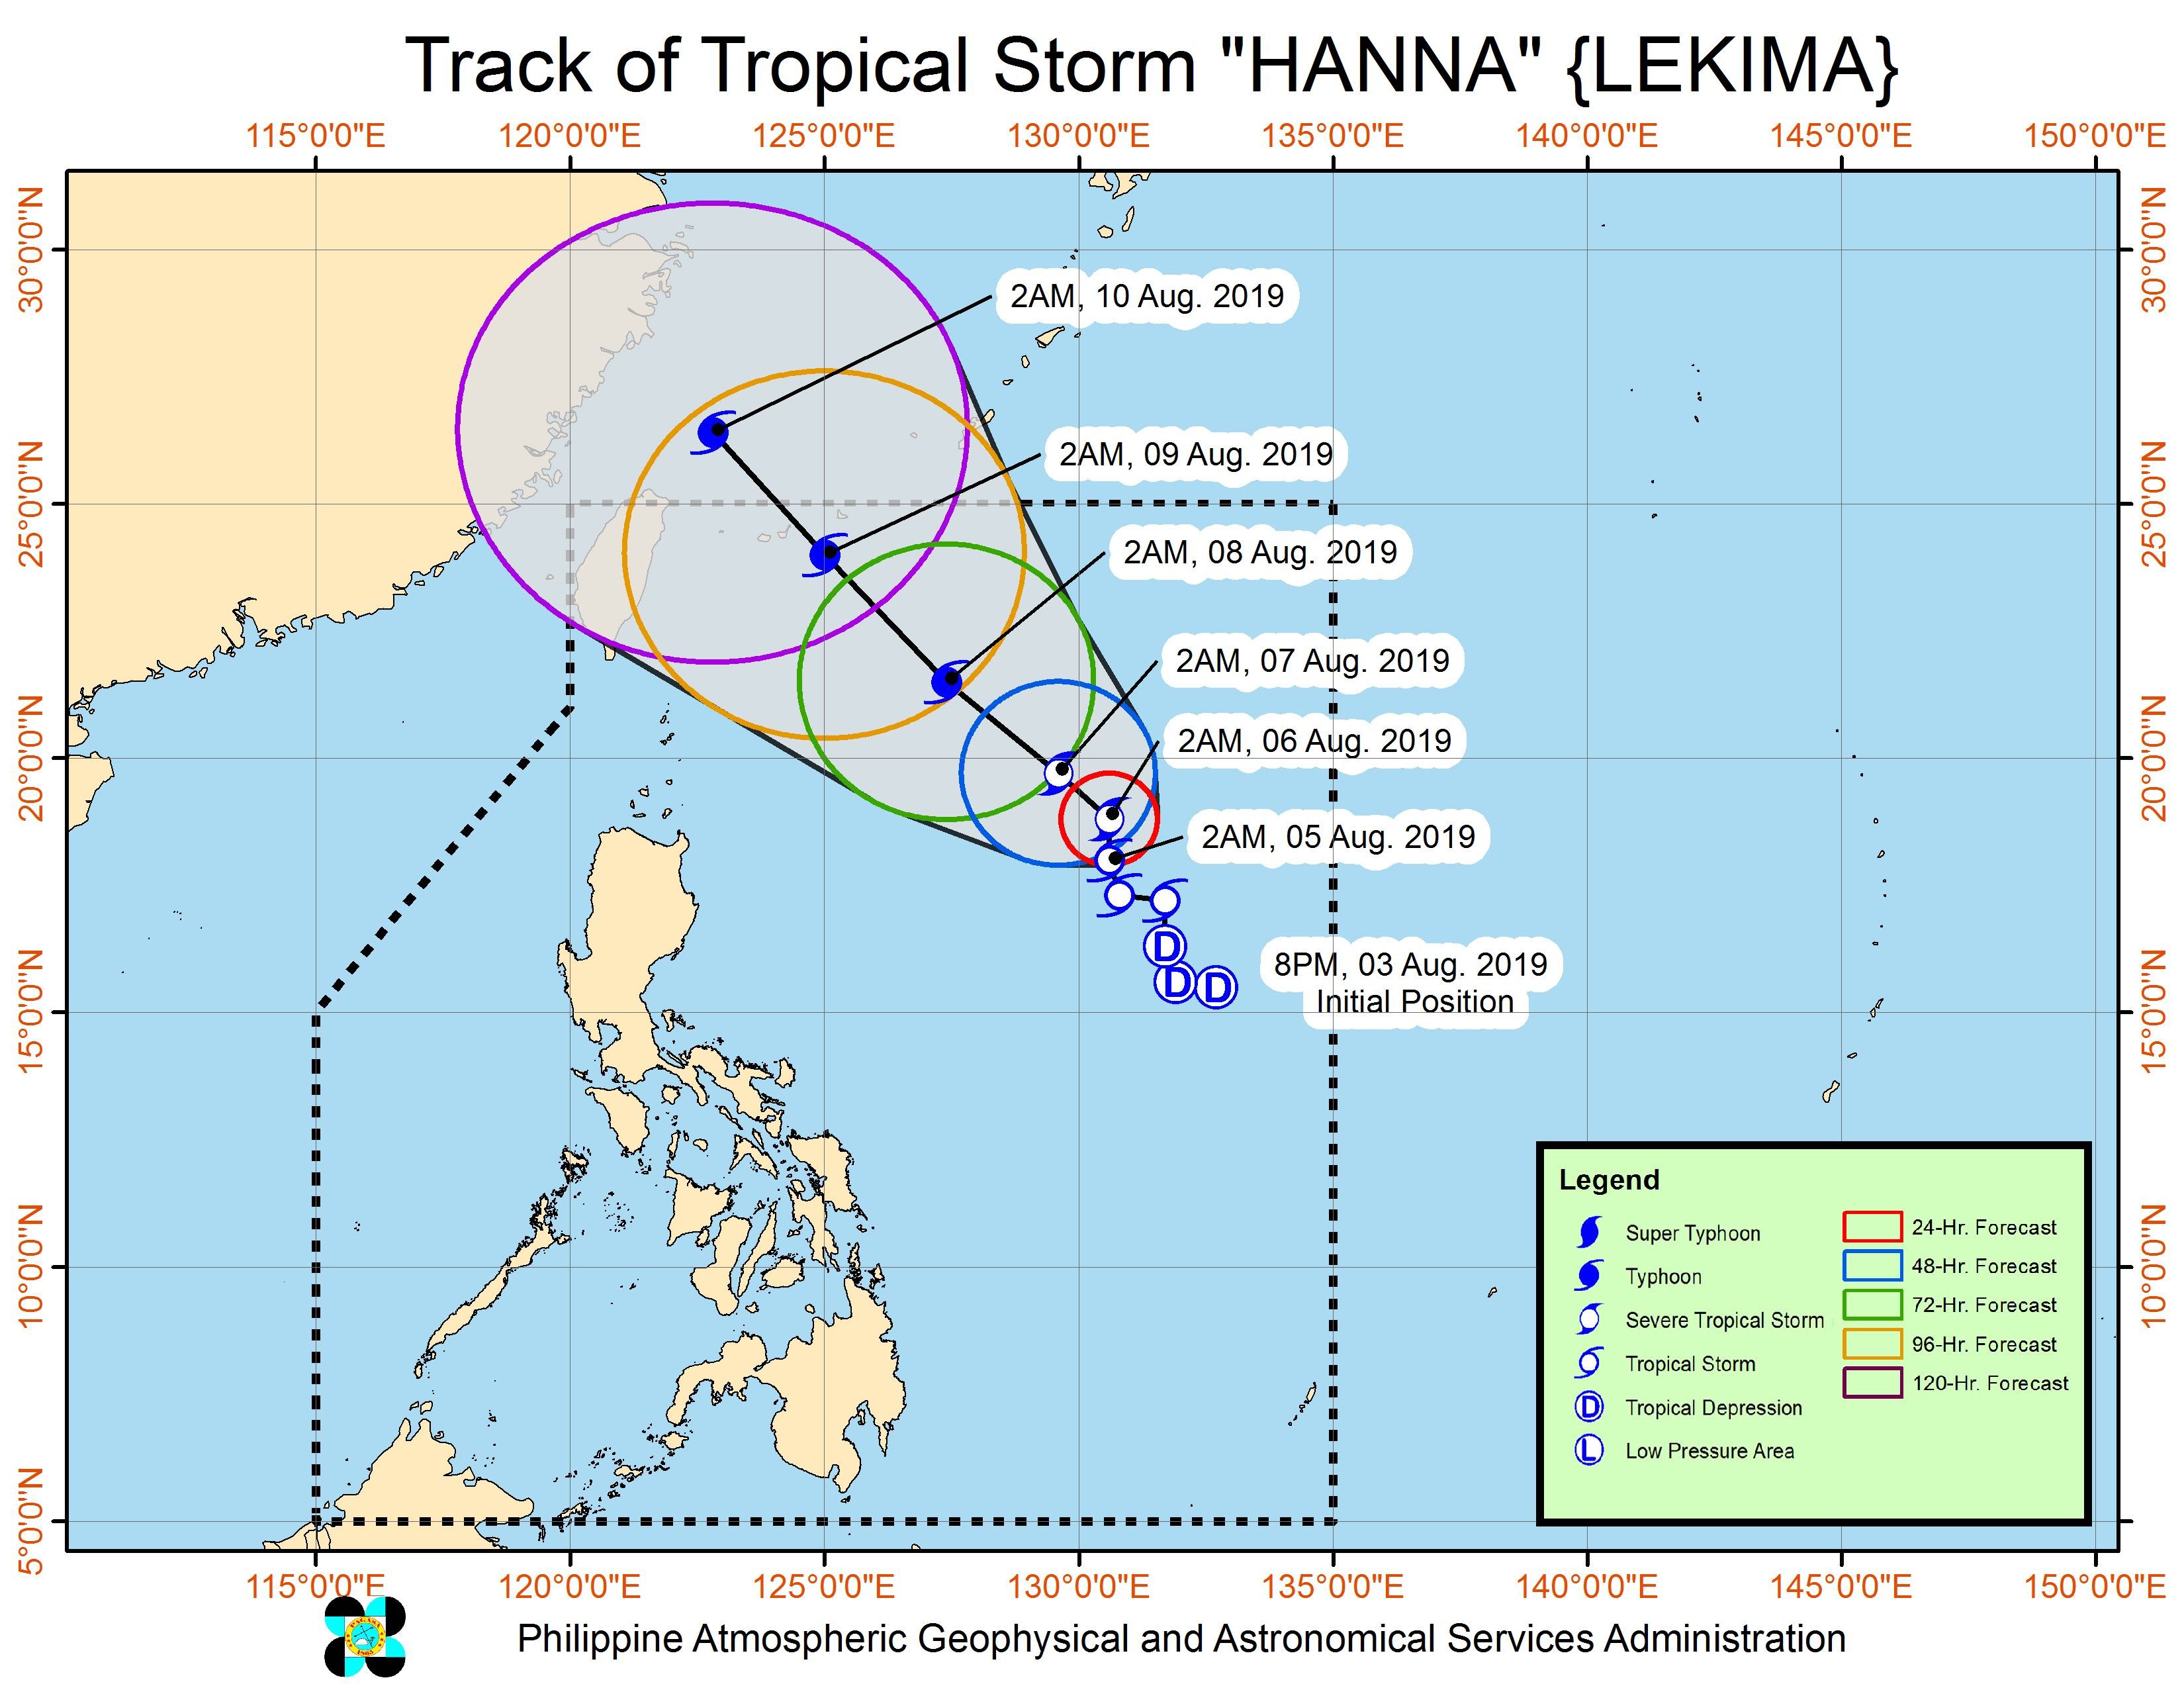 Forecast track of Tropical Storm Hanna (Lekima) as of August 5, 2019, 5 am. Image from PAGASA 